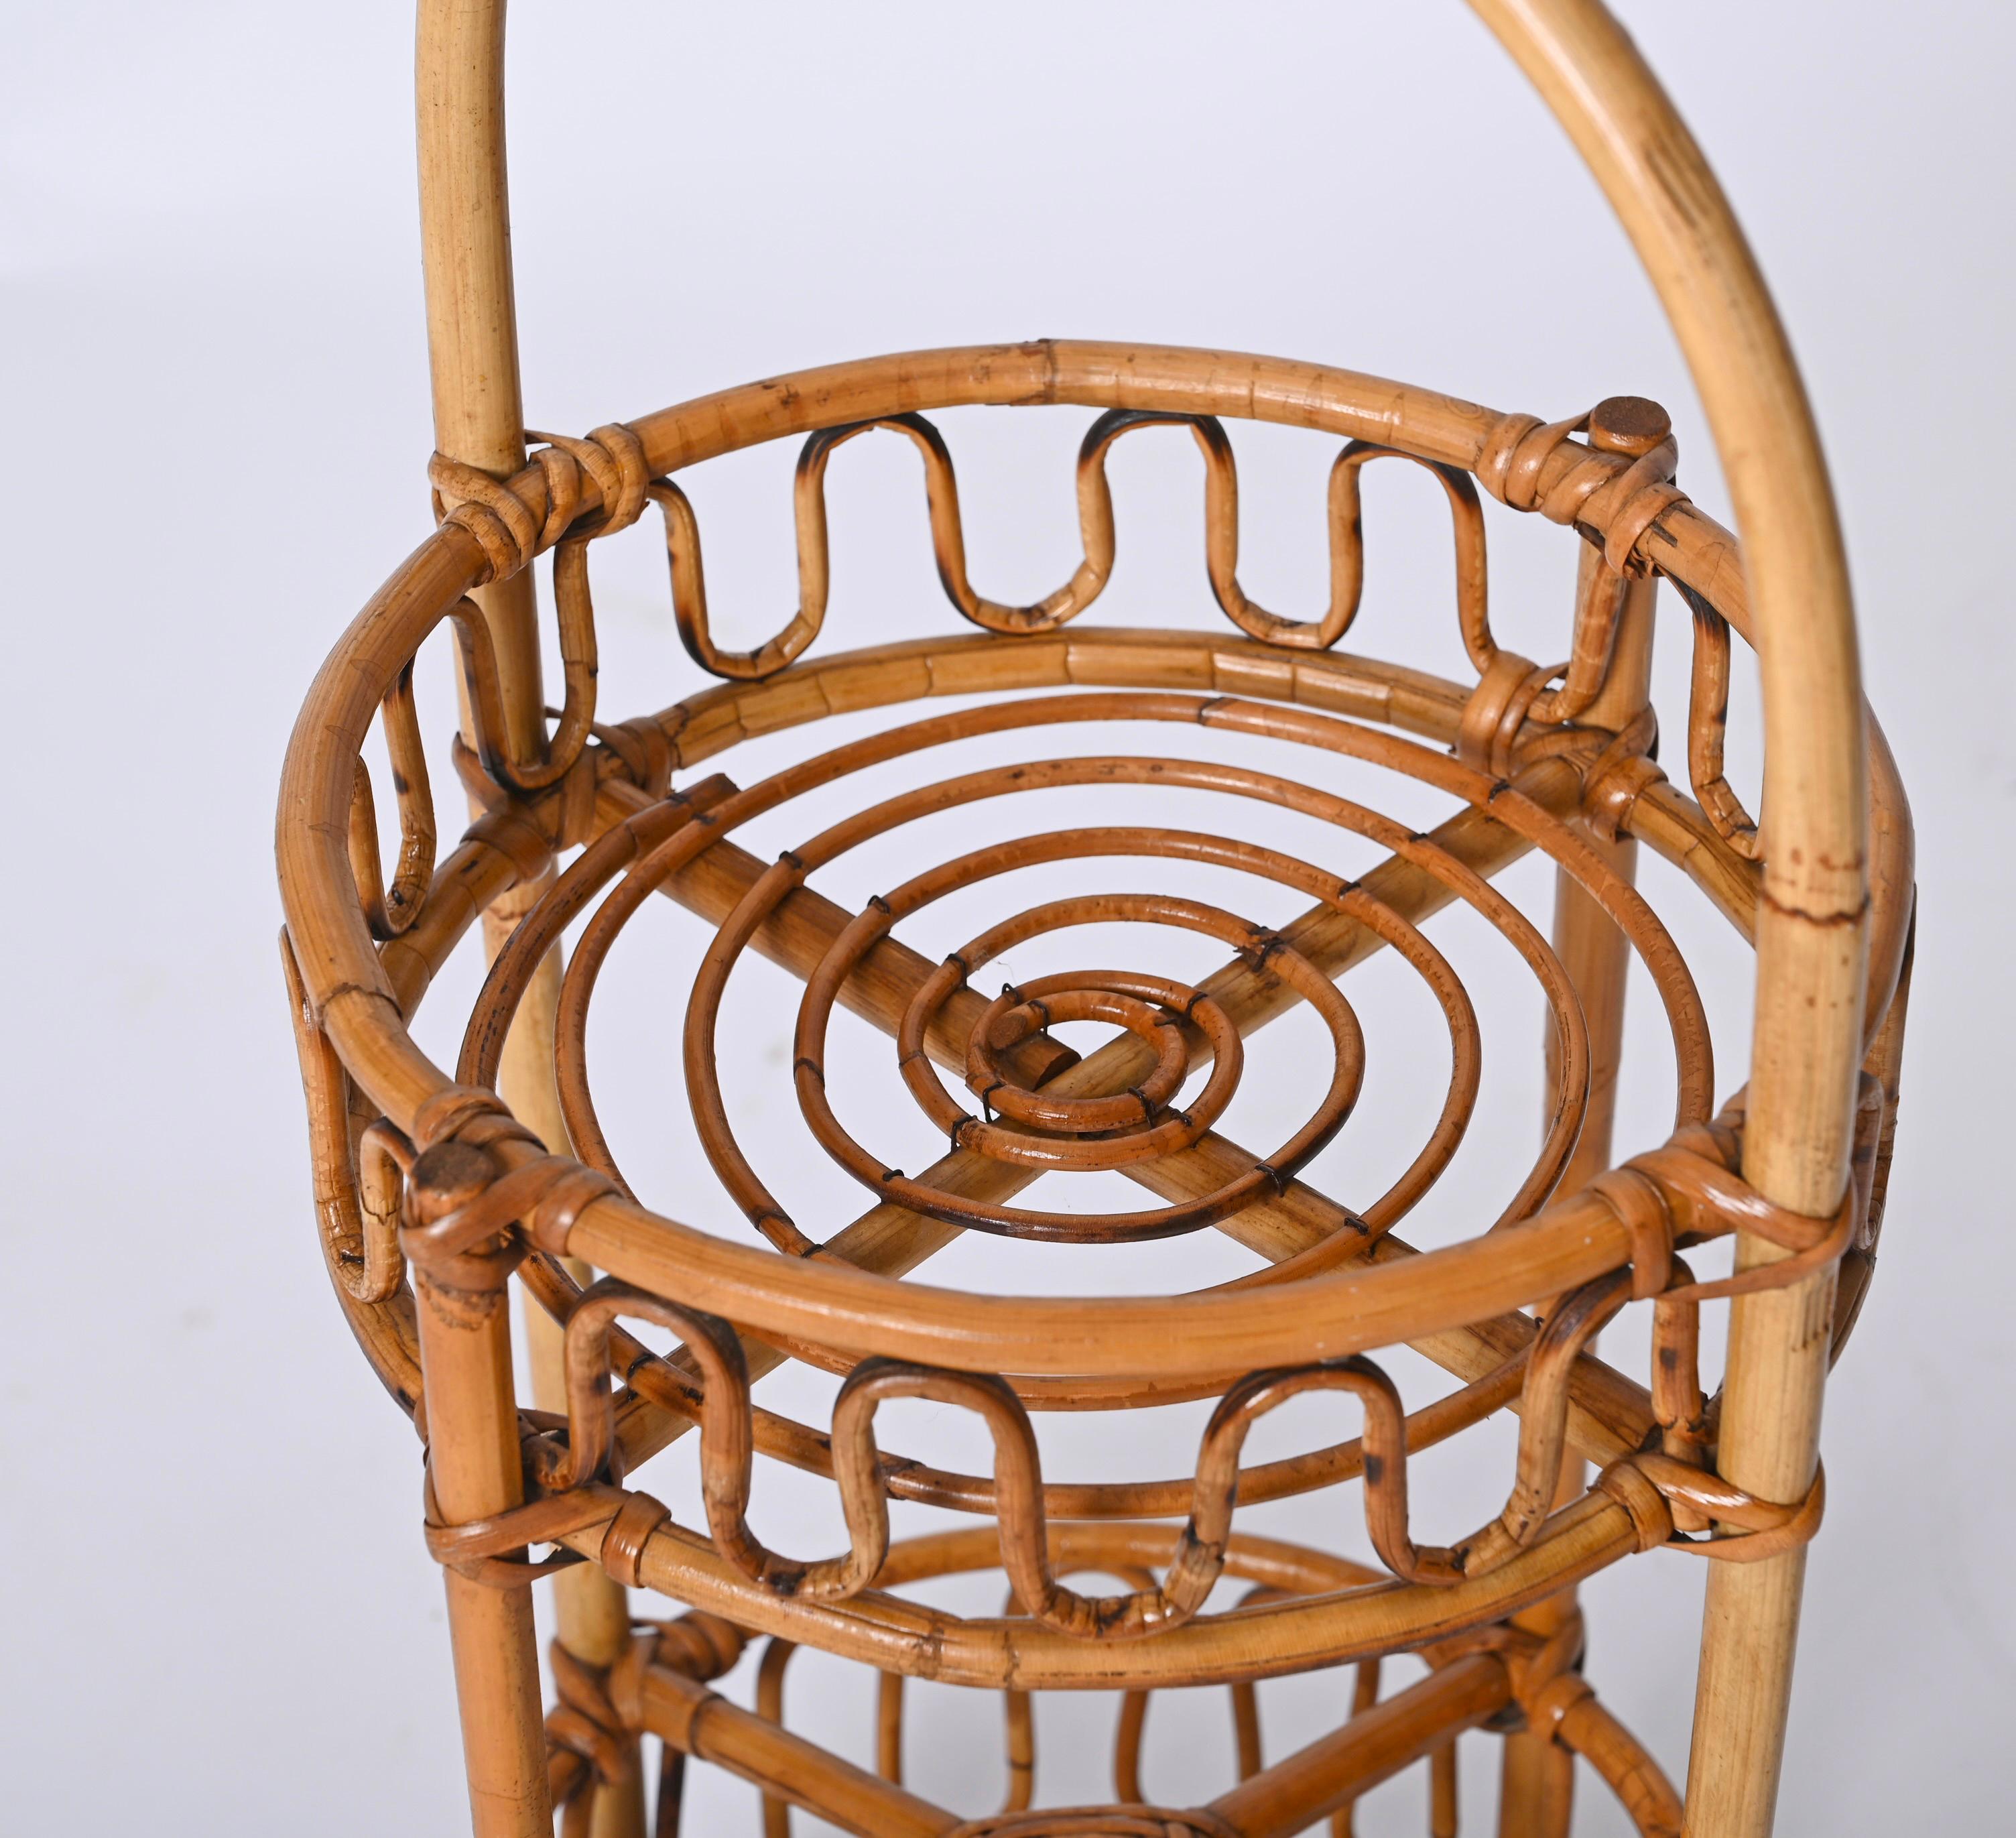 French Riviera Round Service Table with Bamboo and Rattan Bottle Holder, 1960s For Sale 7